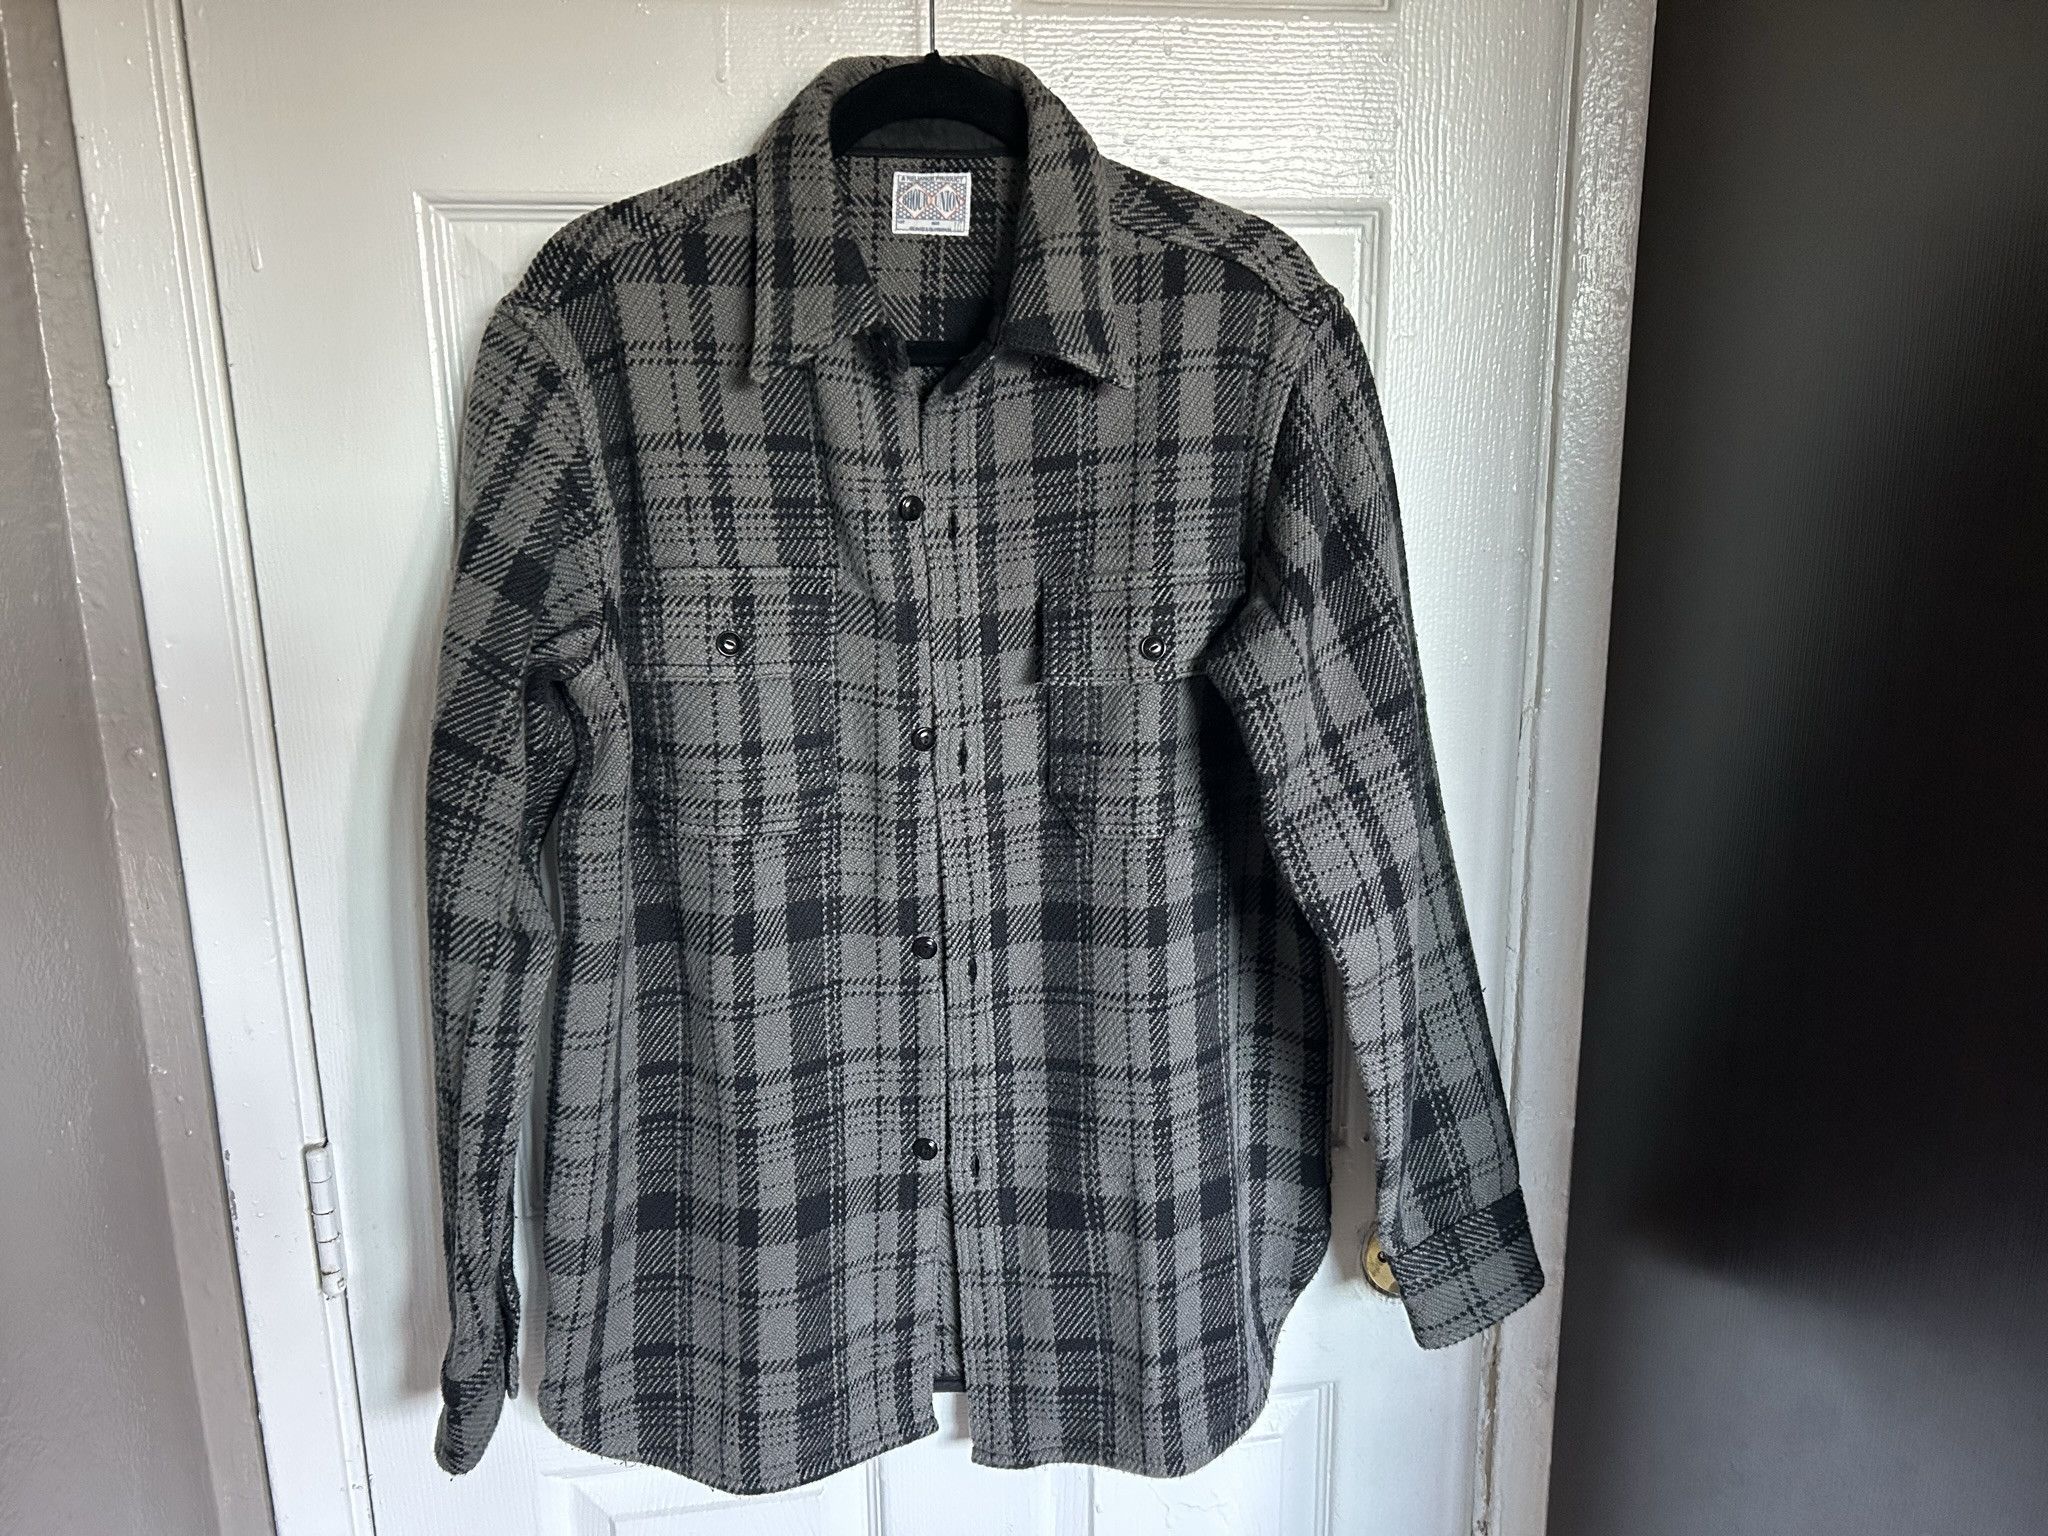 The Real McCoy's 8HU Heavy Weight Flannel Shirt | Grailed